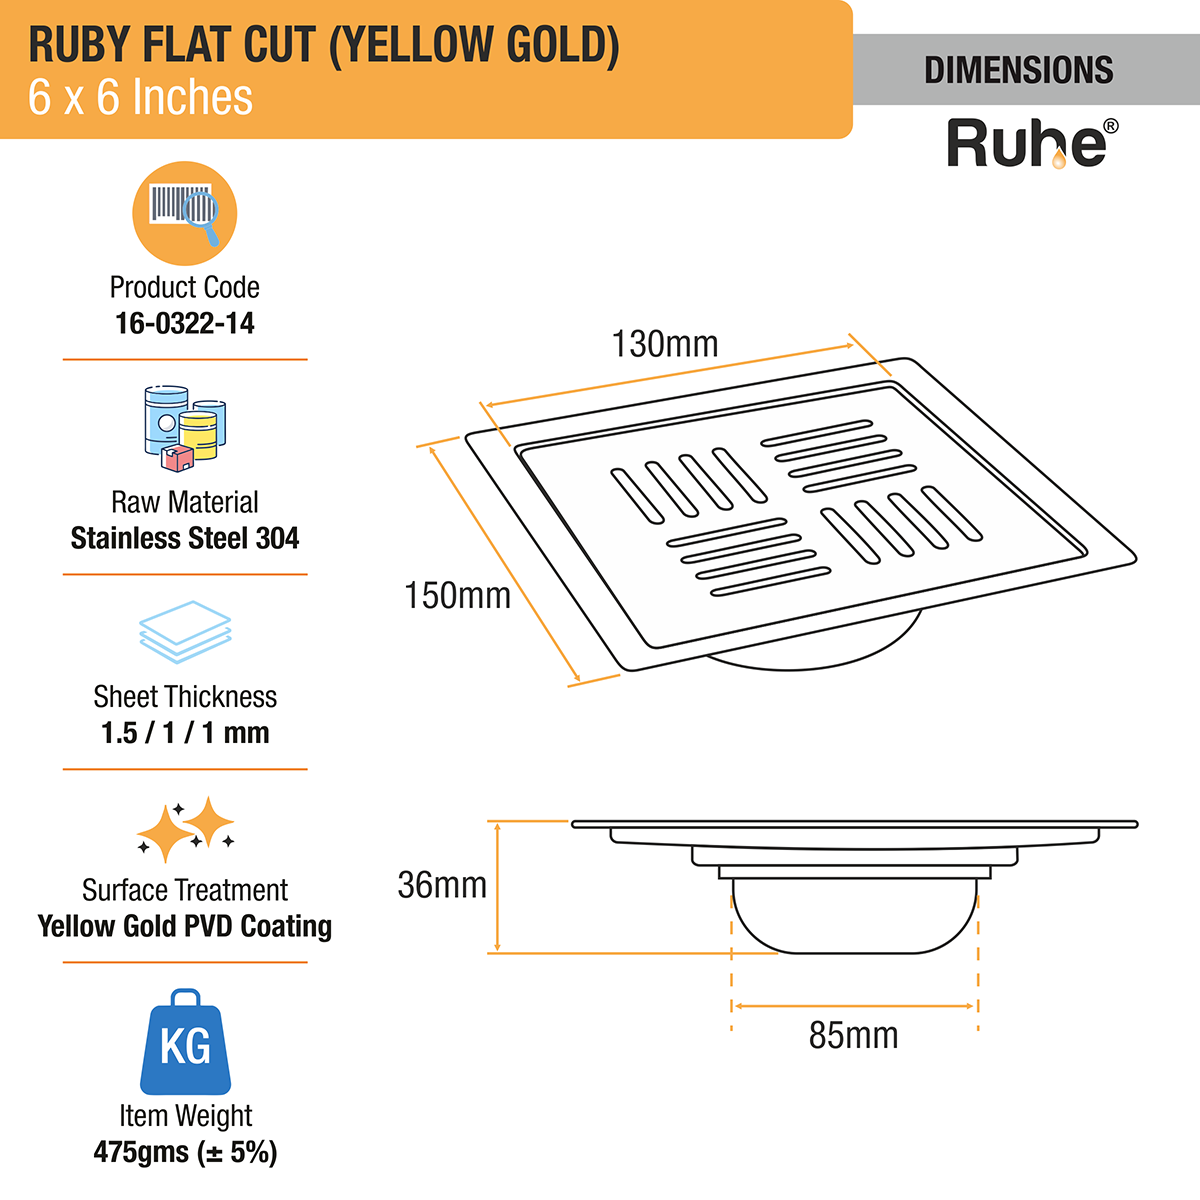 Ruby Square Flat Cut Floor Drain in Yellow Gold PVD Coating (6 x 6 Inches) dimensions and sizes